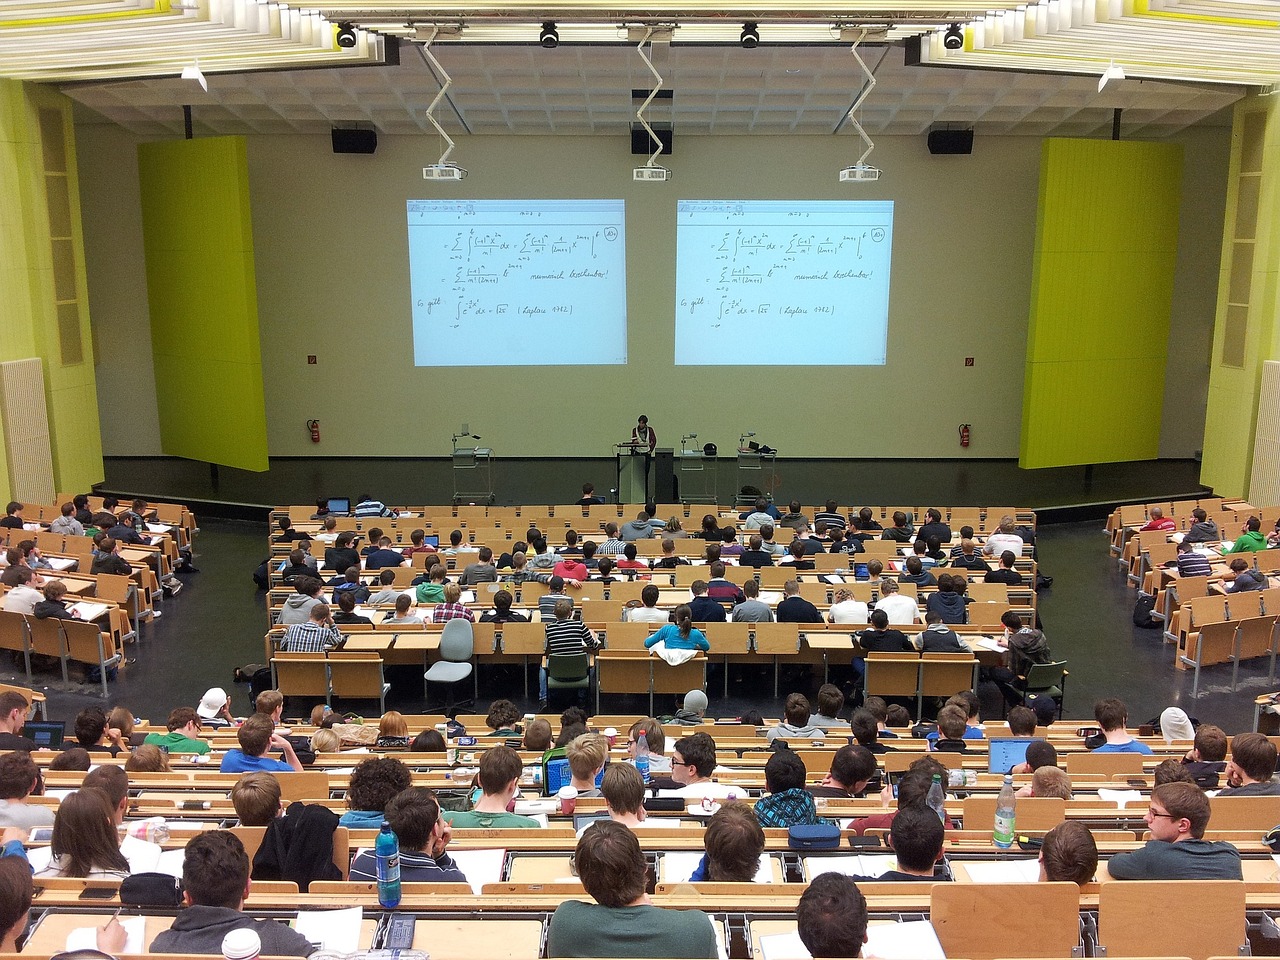 A lecture theatre filled with students.